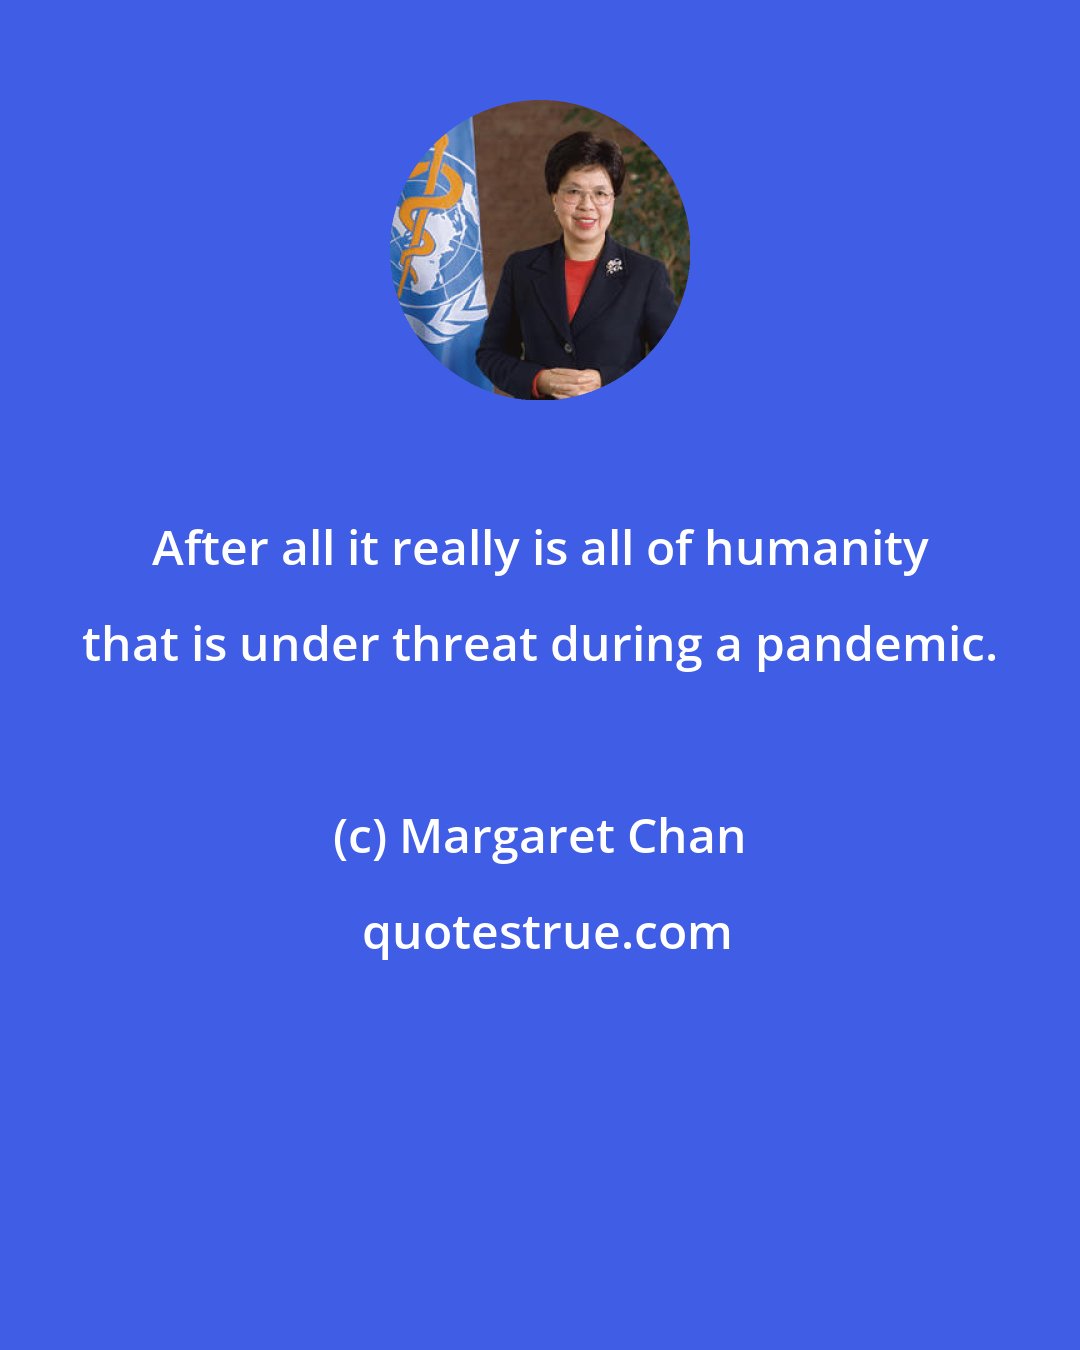 Margaret Chan: After all it really is all of humanity that is under threat during a pandemic.